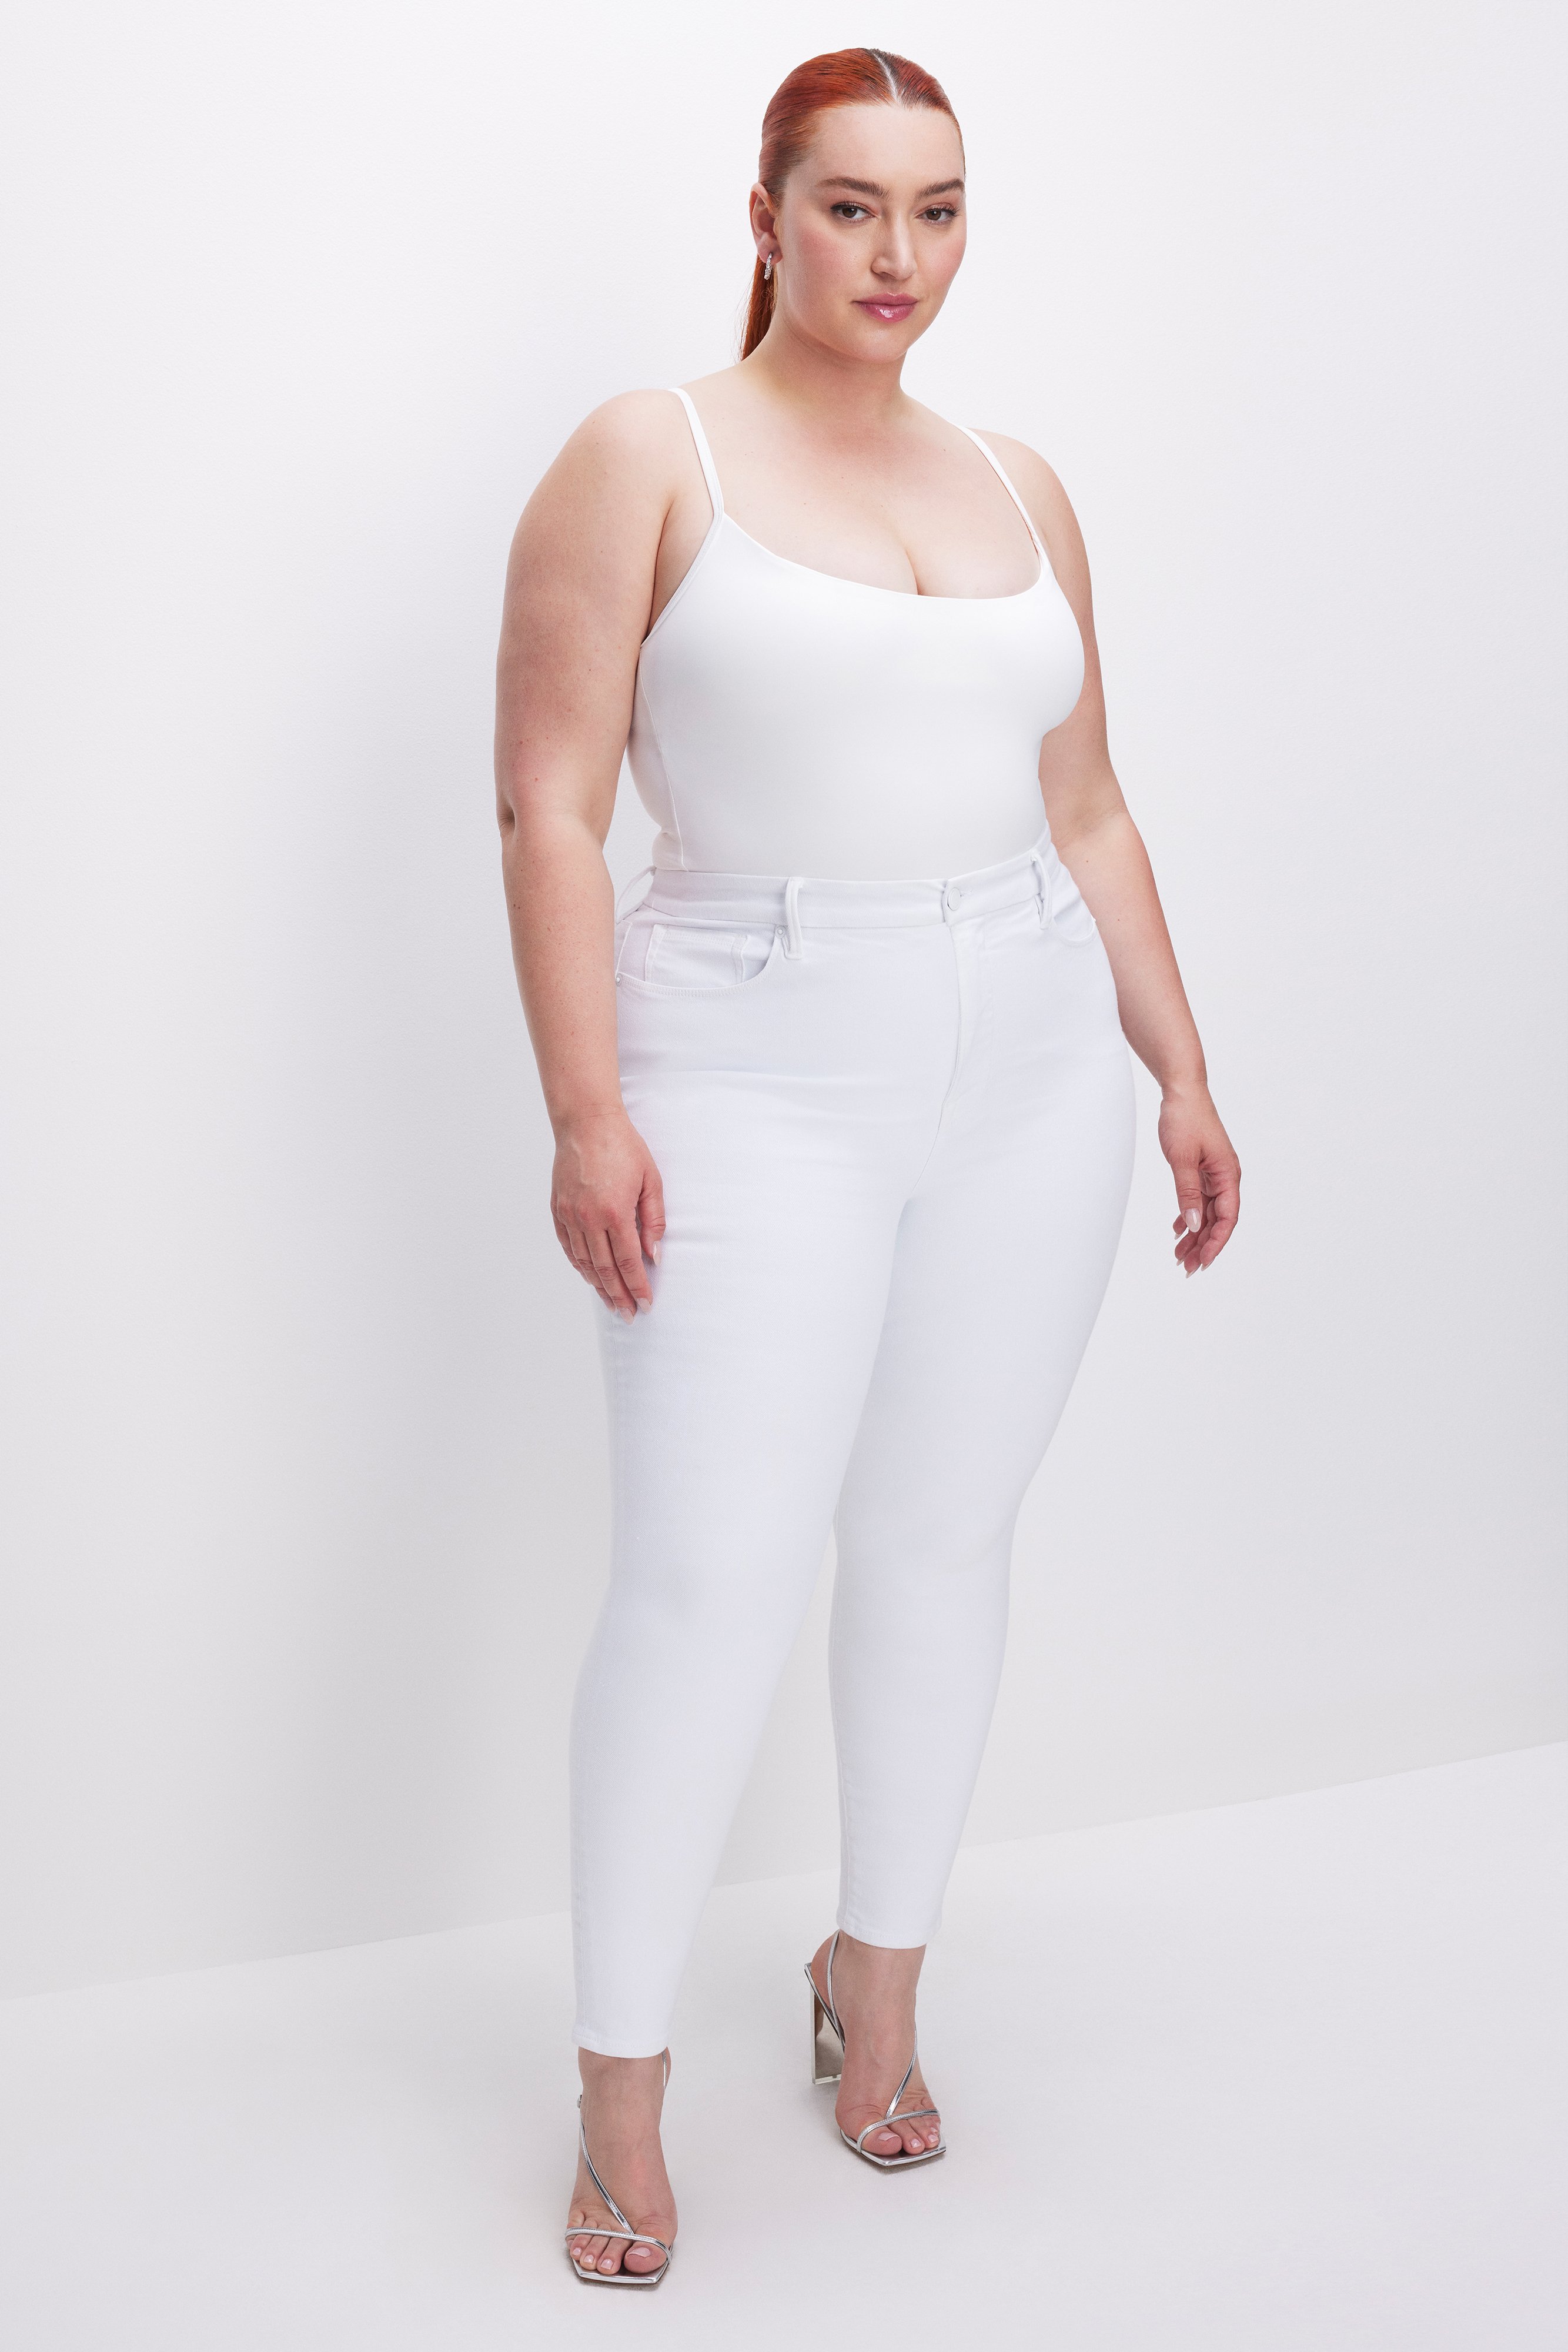 Styled with GOOD LEGS SKINNY LIGHT COMPRESSION JEANS | WHITE001